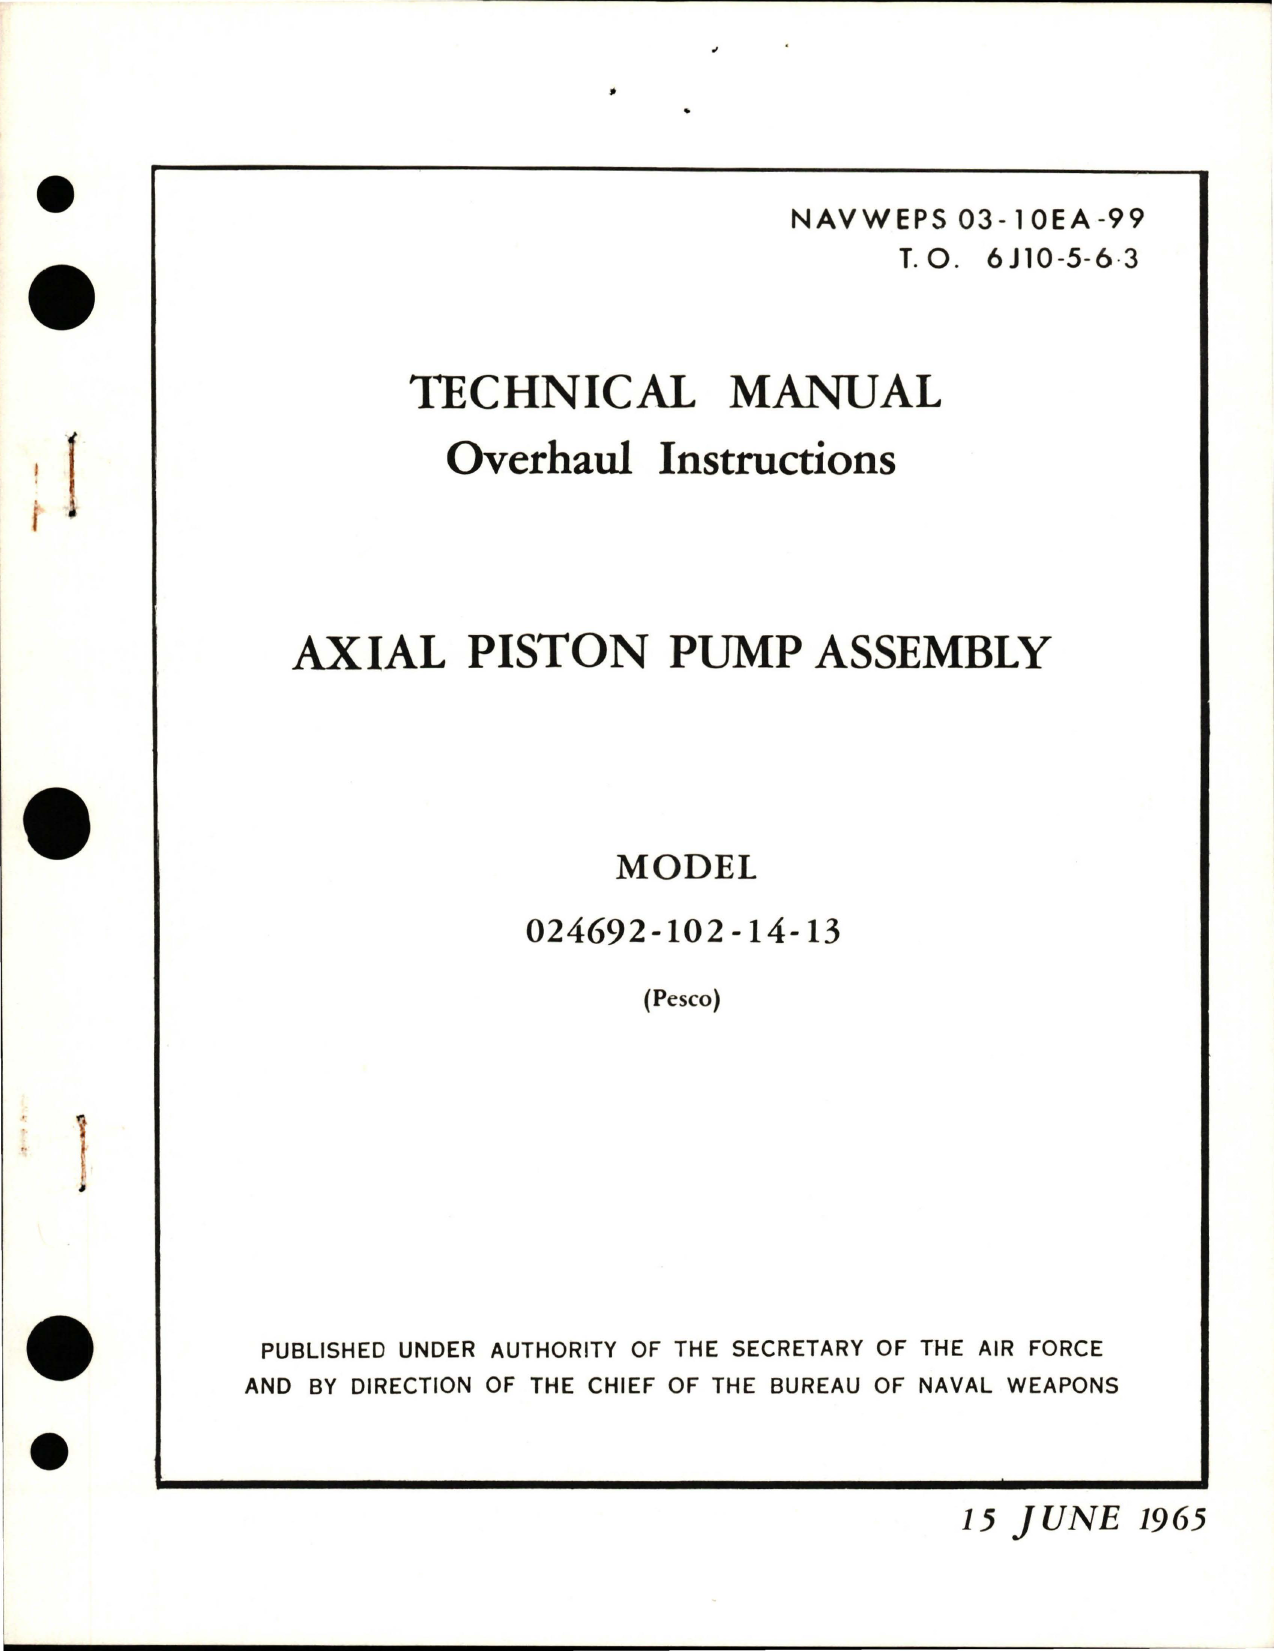 Sample page 1 from AirCorps Library document: Overhaul Instructions for Axial Piston Pump Assembly - 024692-102-14-13